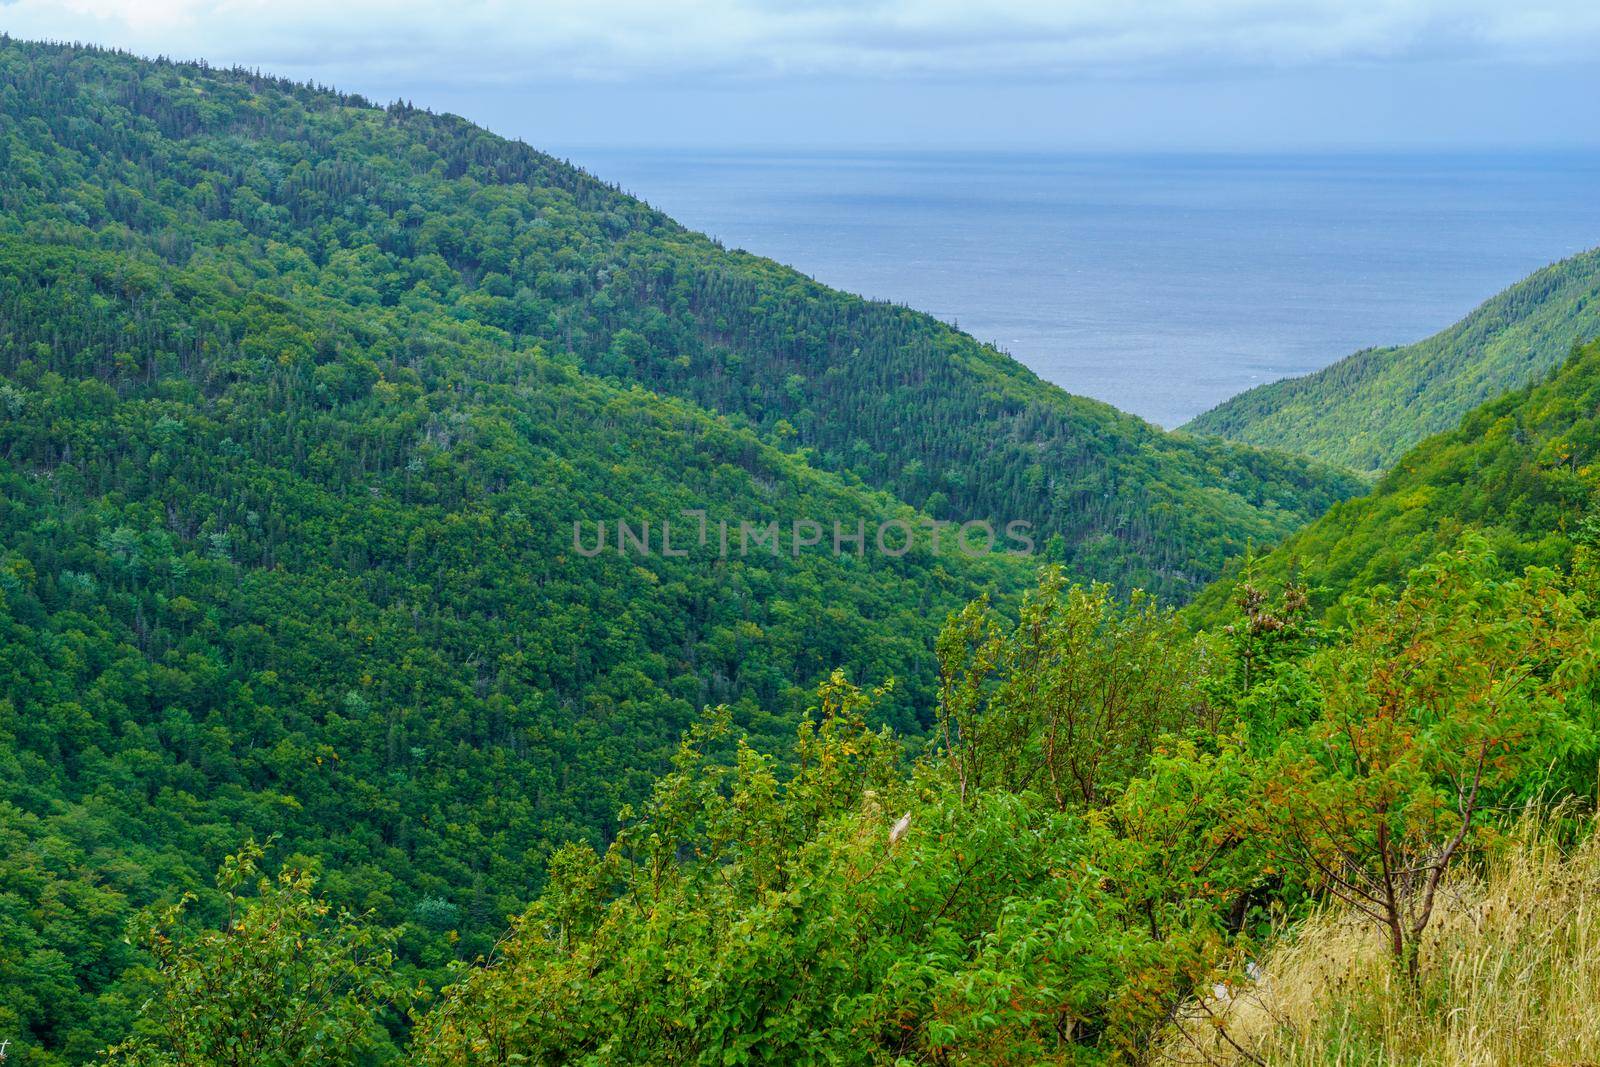 Landscape of the Fishing Cove, along the Cabot Trail by RnDmS